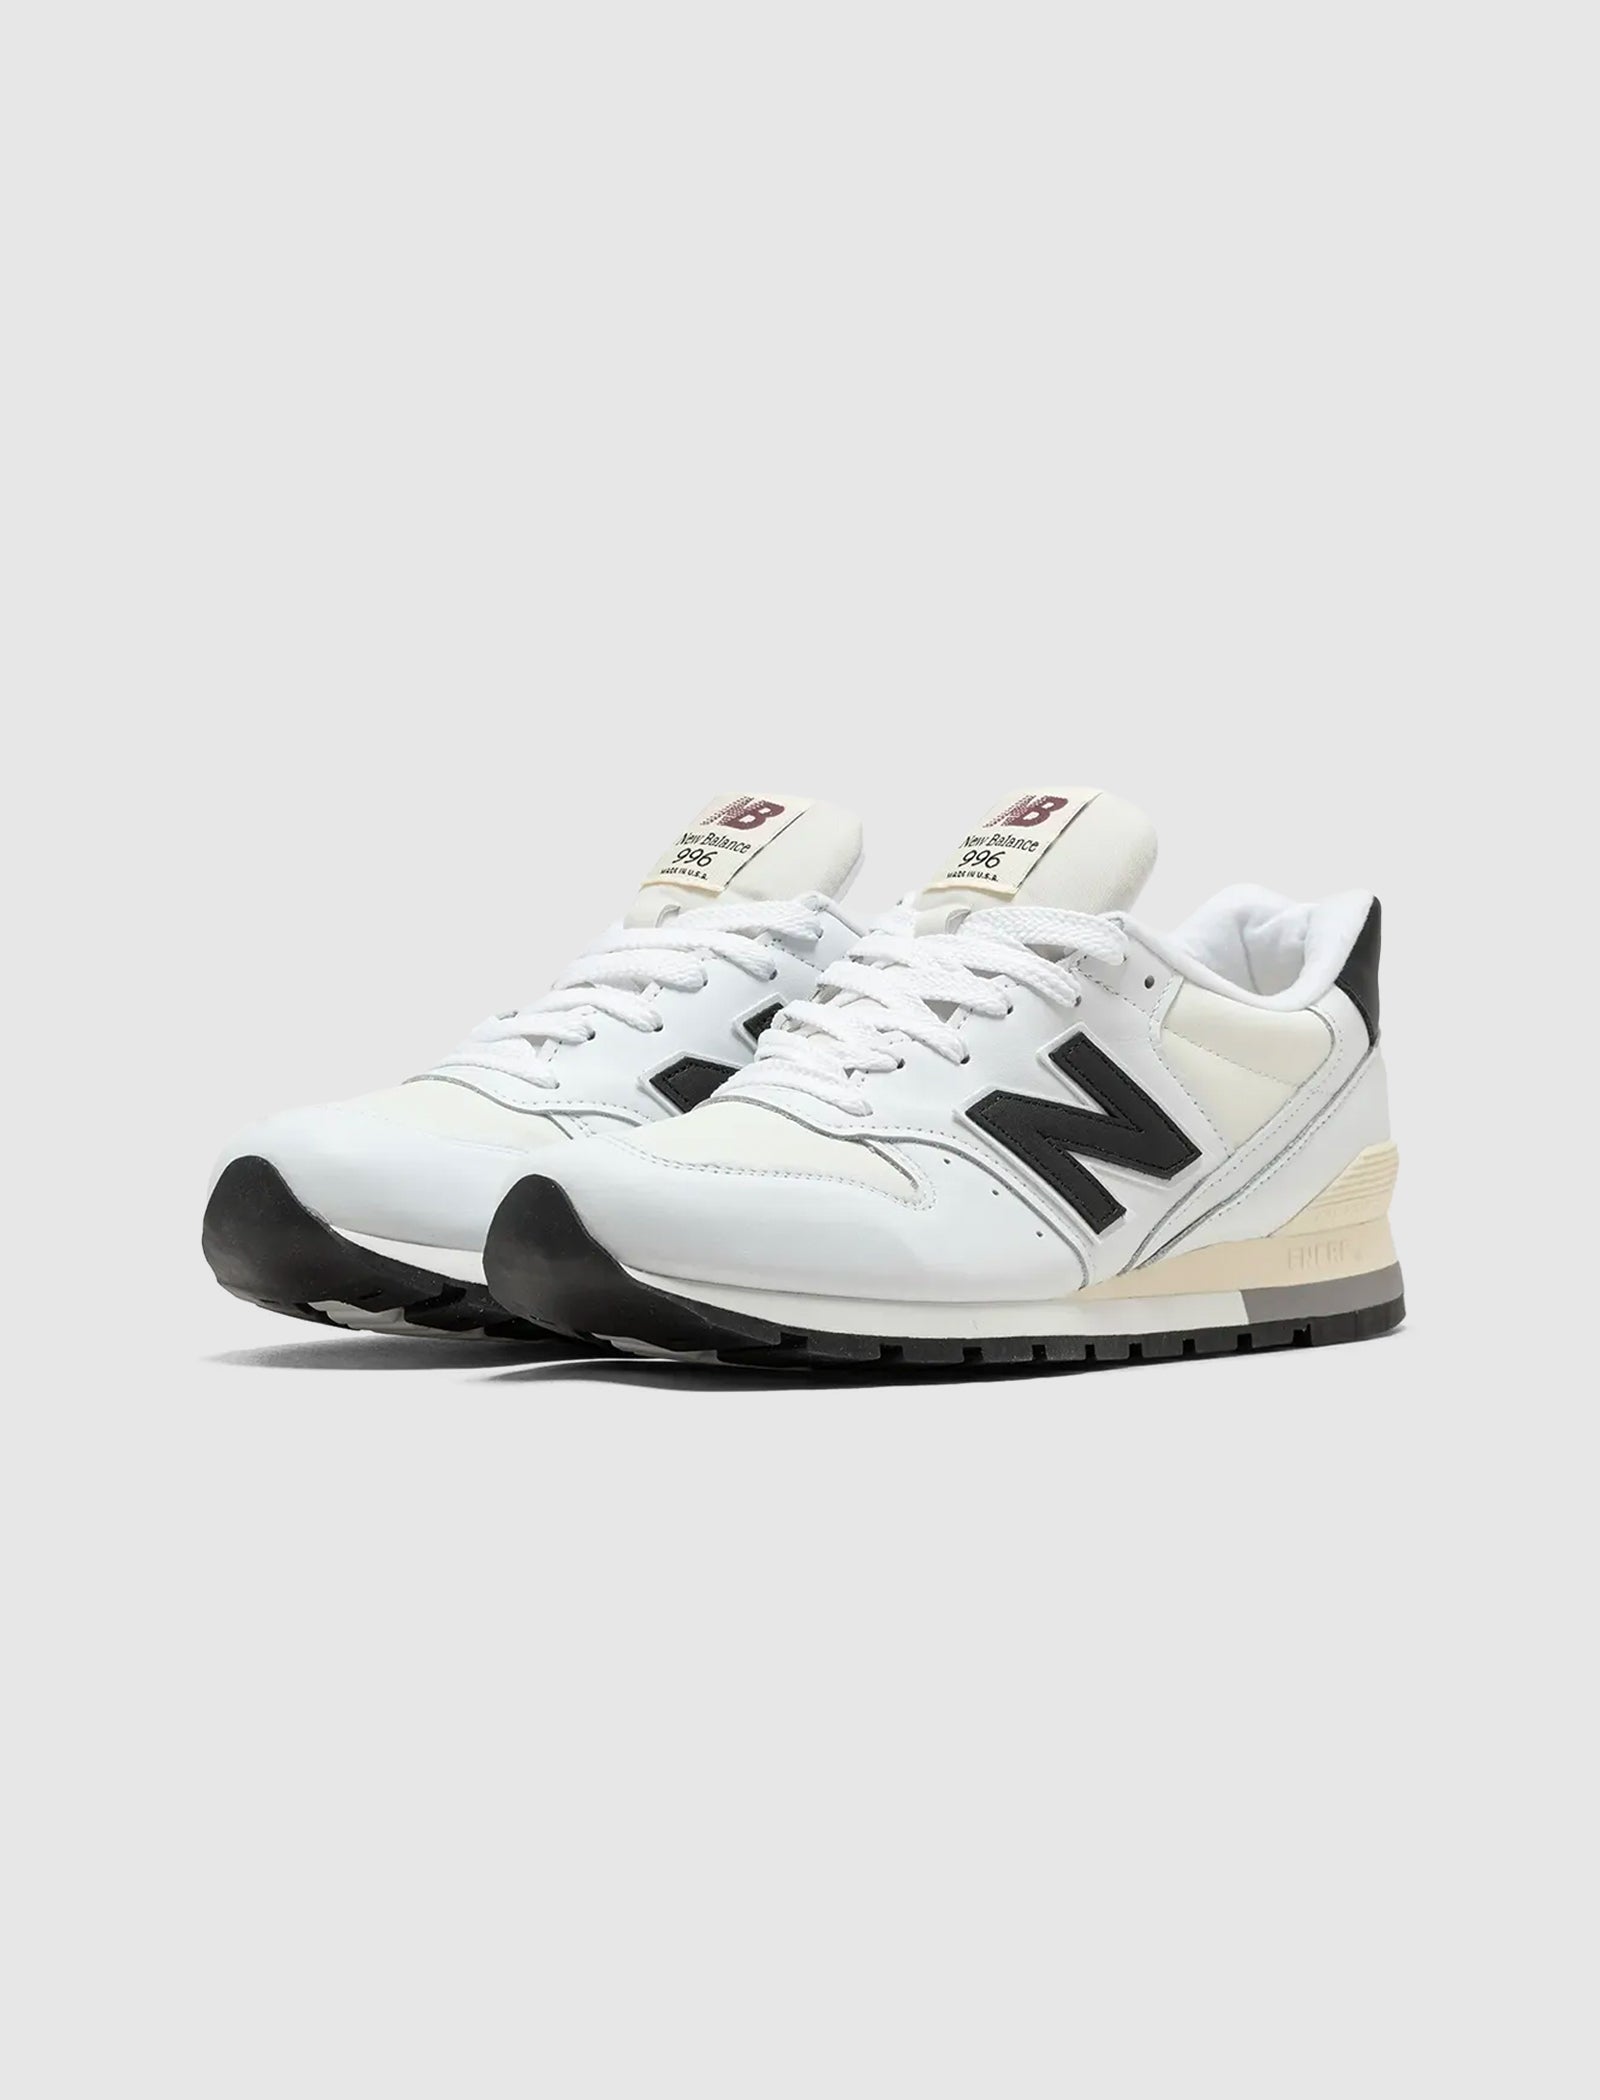 996 MADE IN USA "WHITE/BLACK"